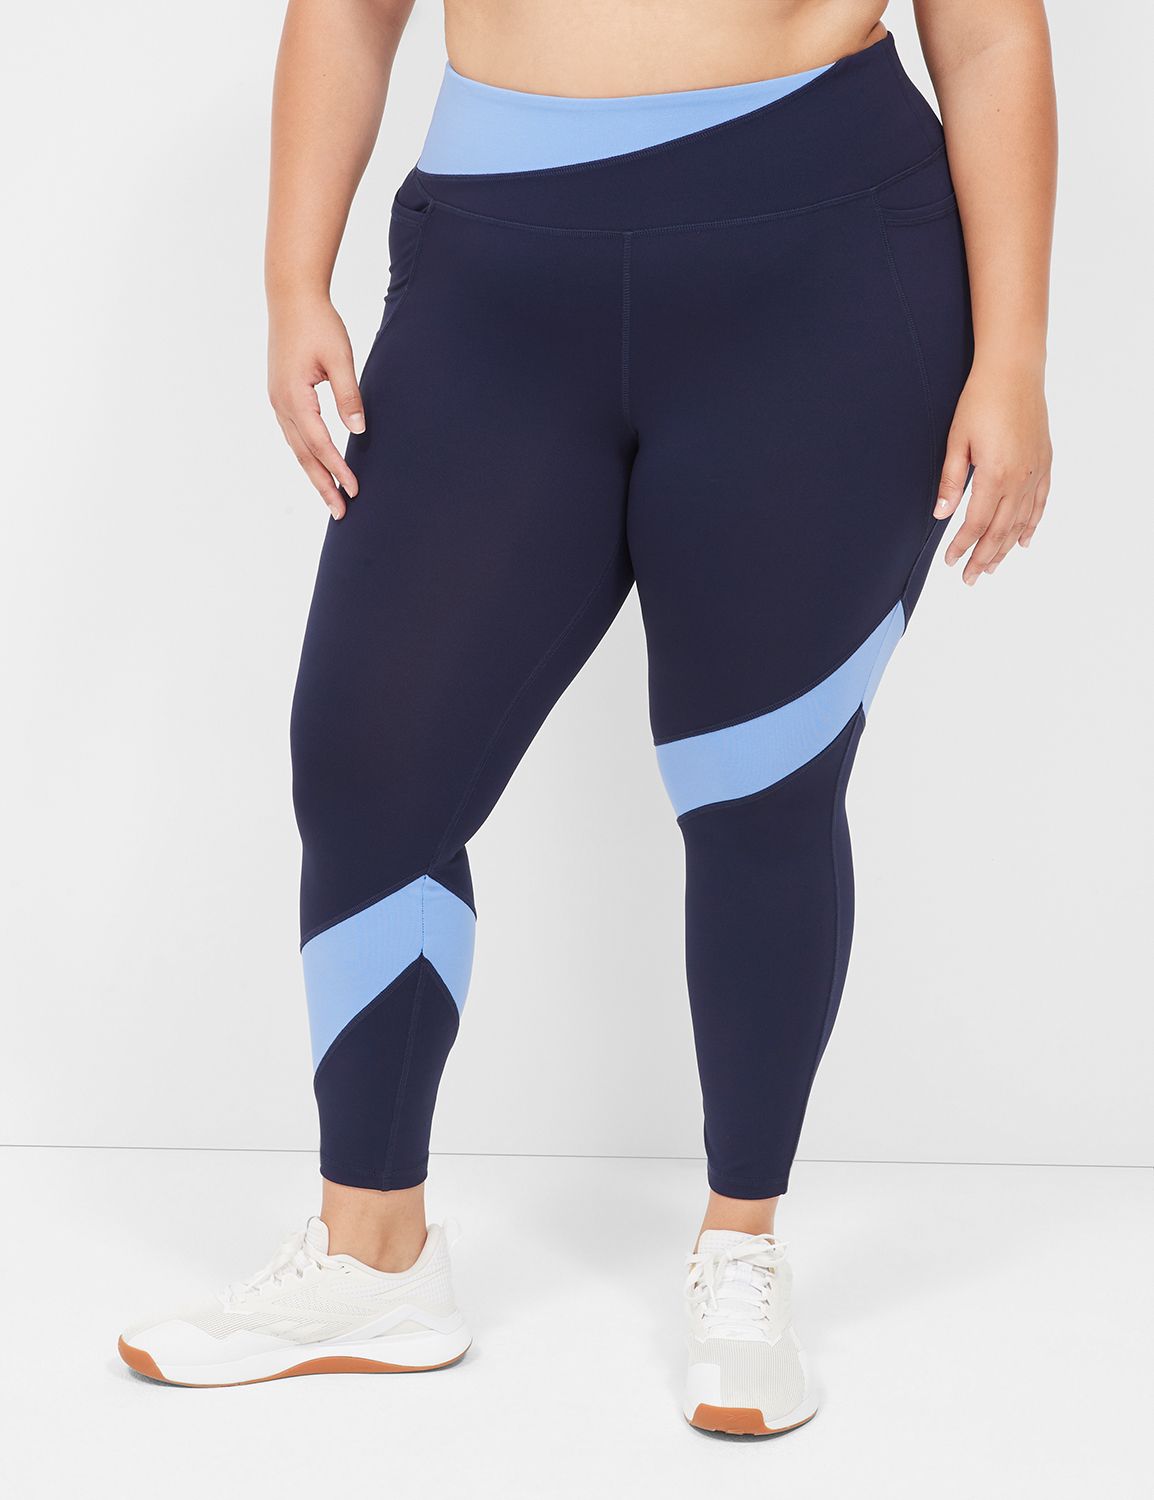 LEEMIIJUU Plus Size XXL Womens Tiktok Yoga Pants High Waist Push Up Leggings  For Gym, Exercise, Fitness, Running, And Athletic Trousers From Pandae,  $23.38